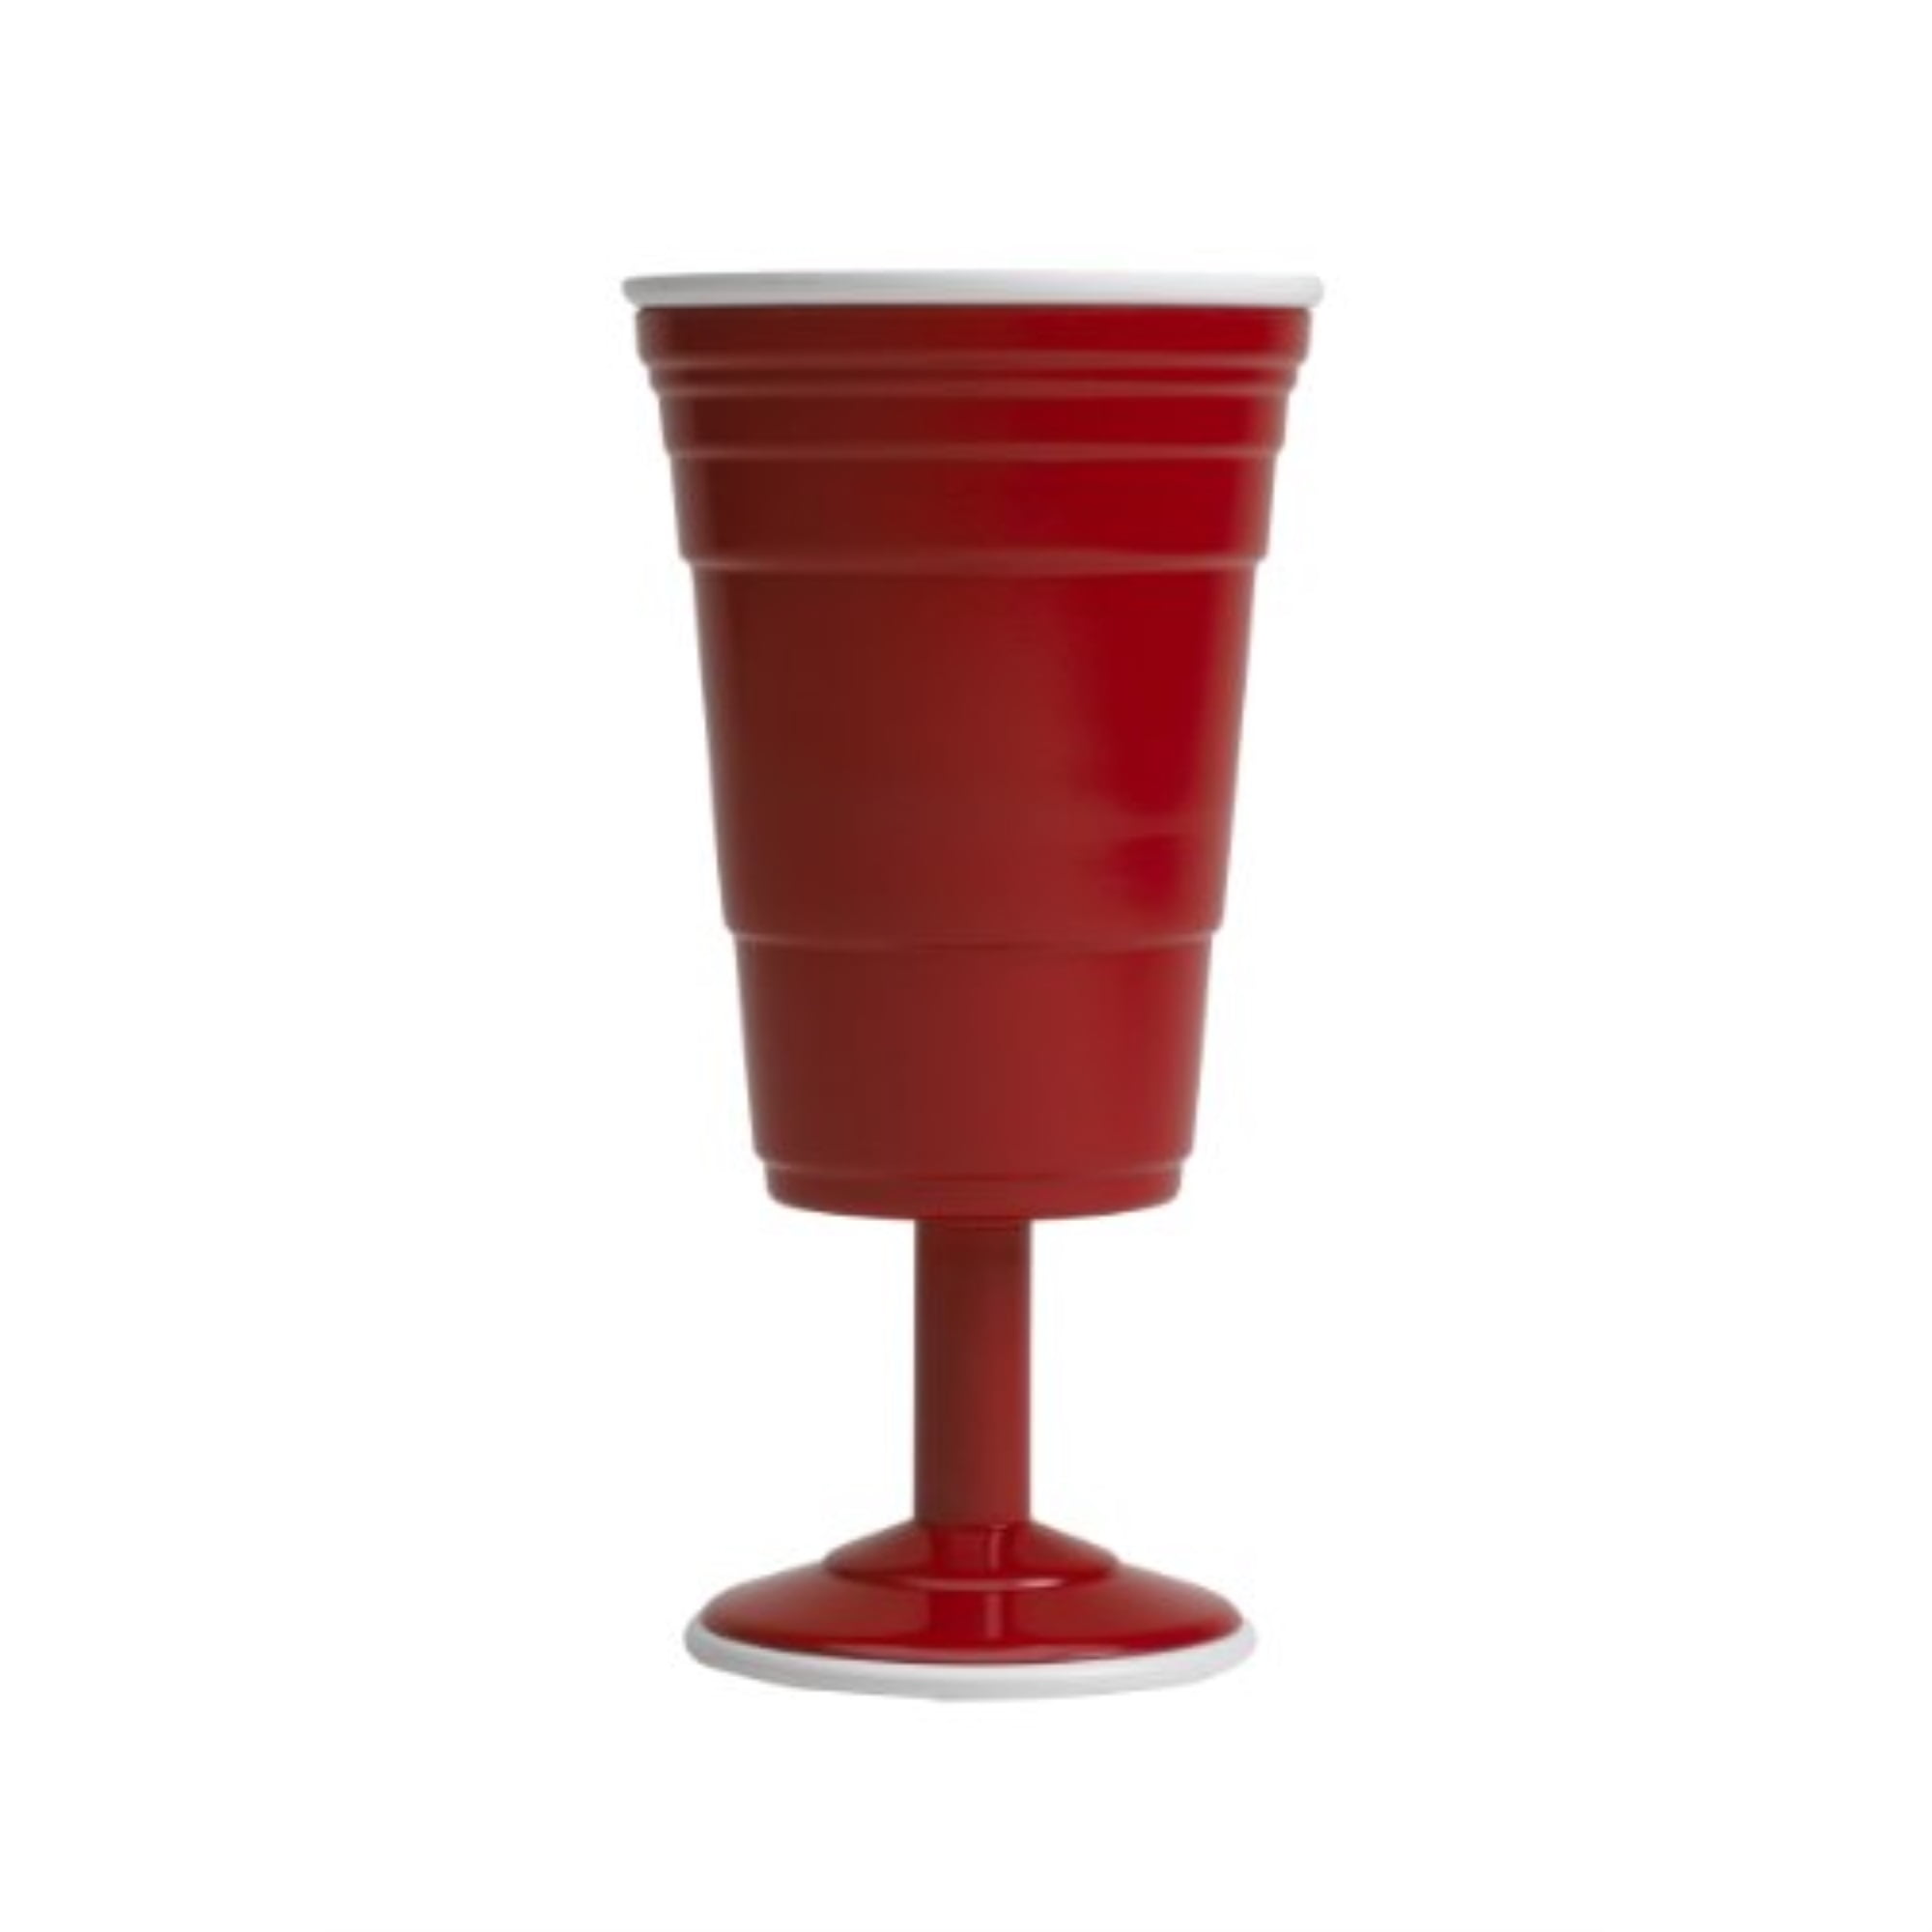 Dining  Las Vegas Drunk 1 2 Red Cups Ready To Party Lv Cups For